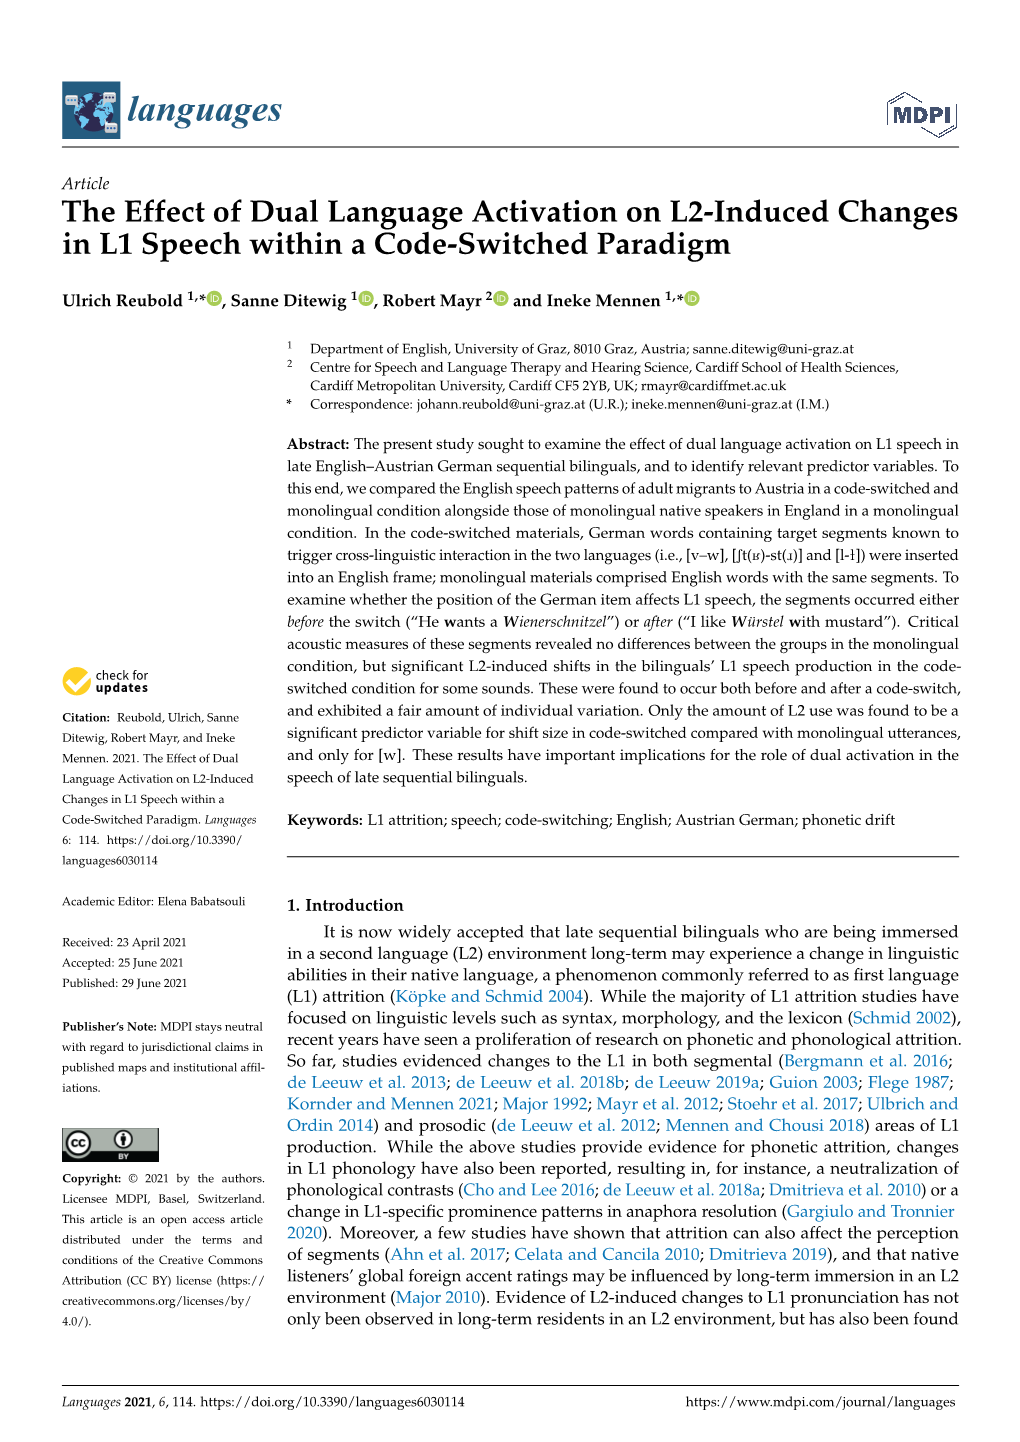 The Effect of Dual Language Activation on L2-Induced Changes in L1 Speech Within a Code-Switched Paradigm